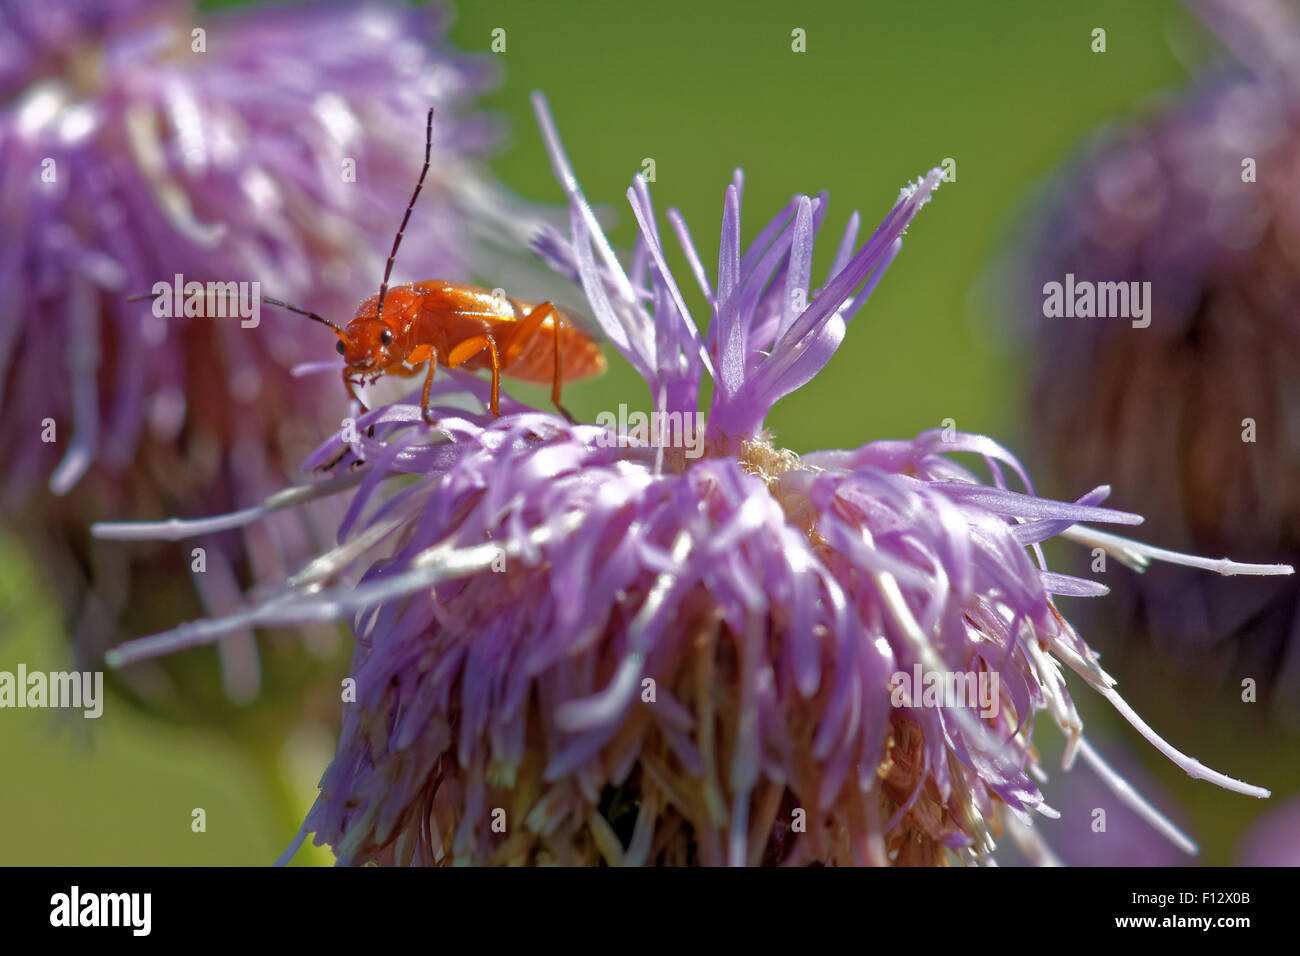 Soldier beetle (Cantharis livida) on thistle flowers Stock Photo